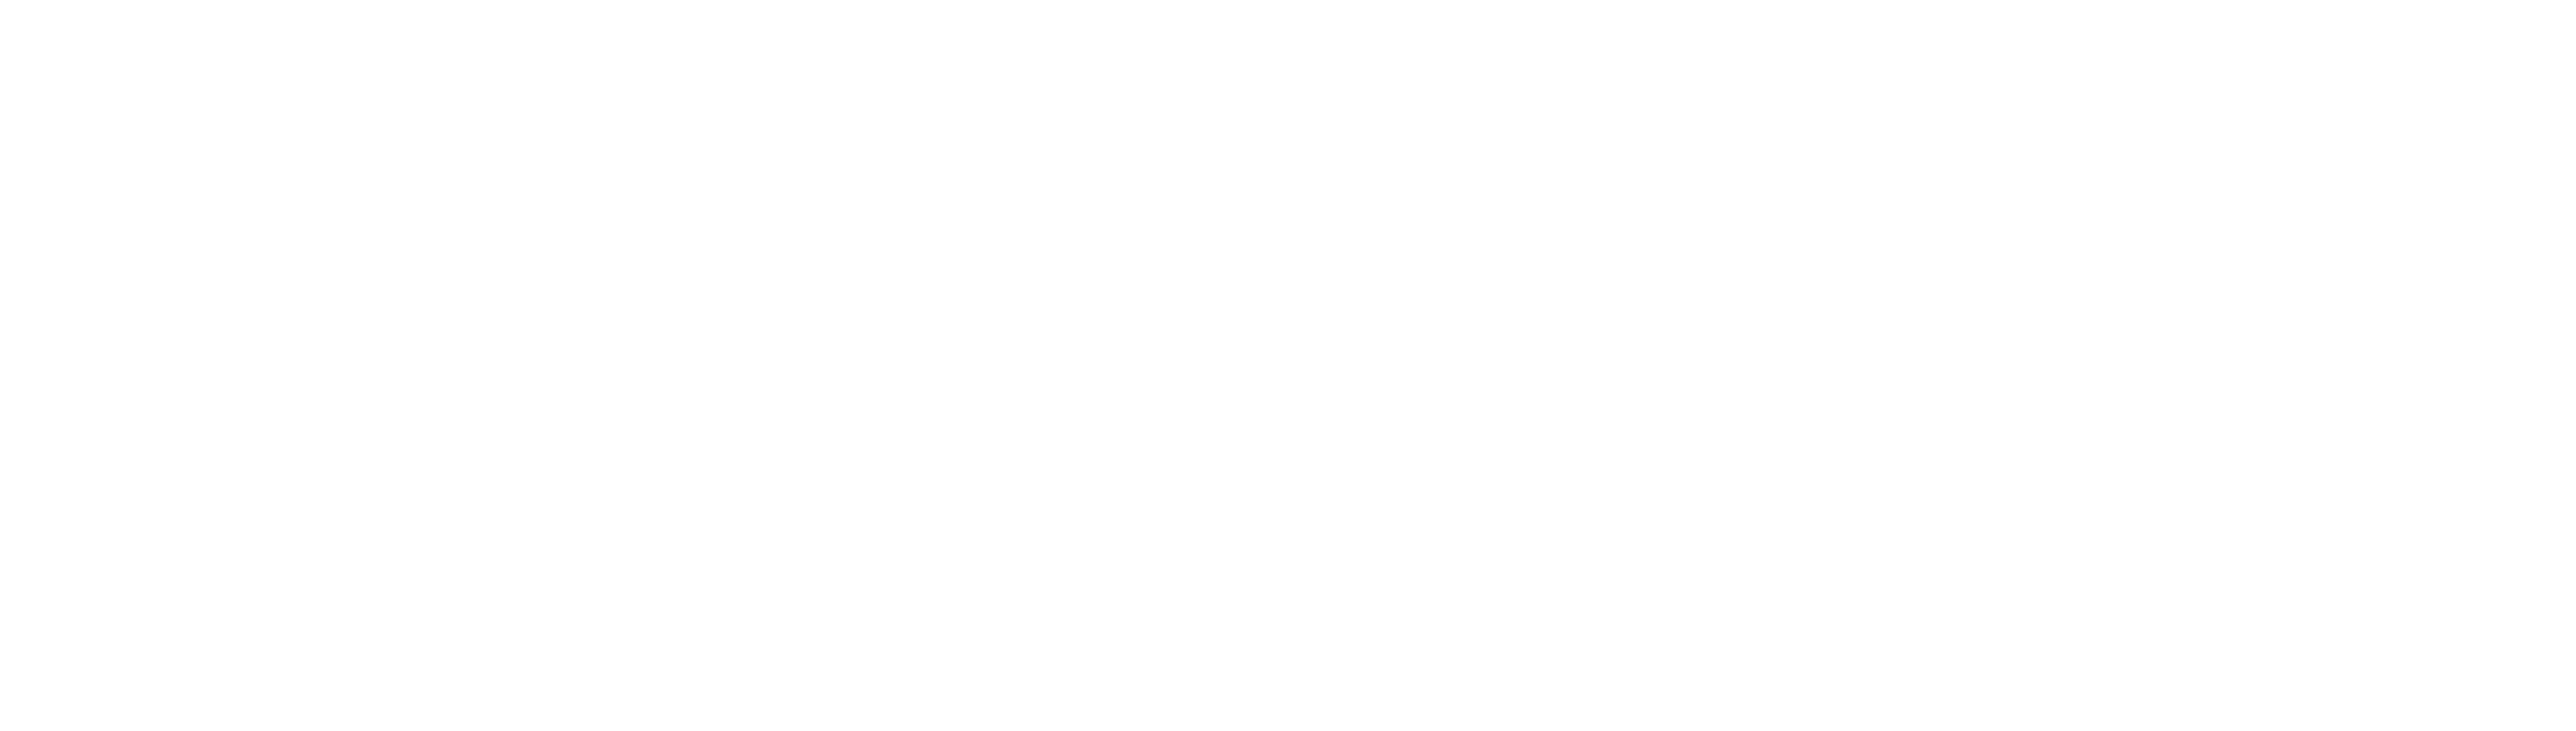 Digital Operations & Tech Consulting GmbH 